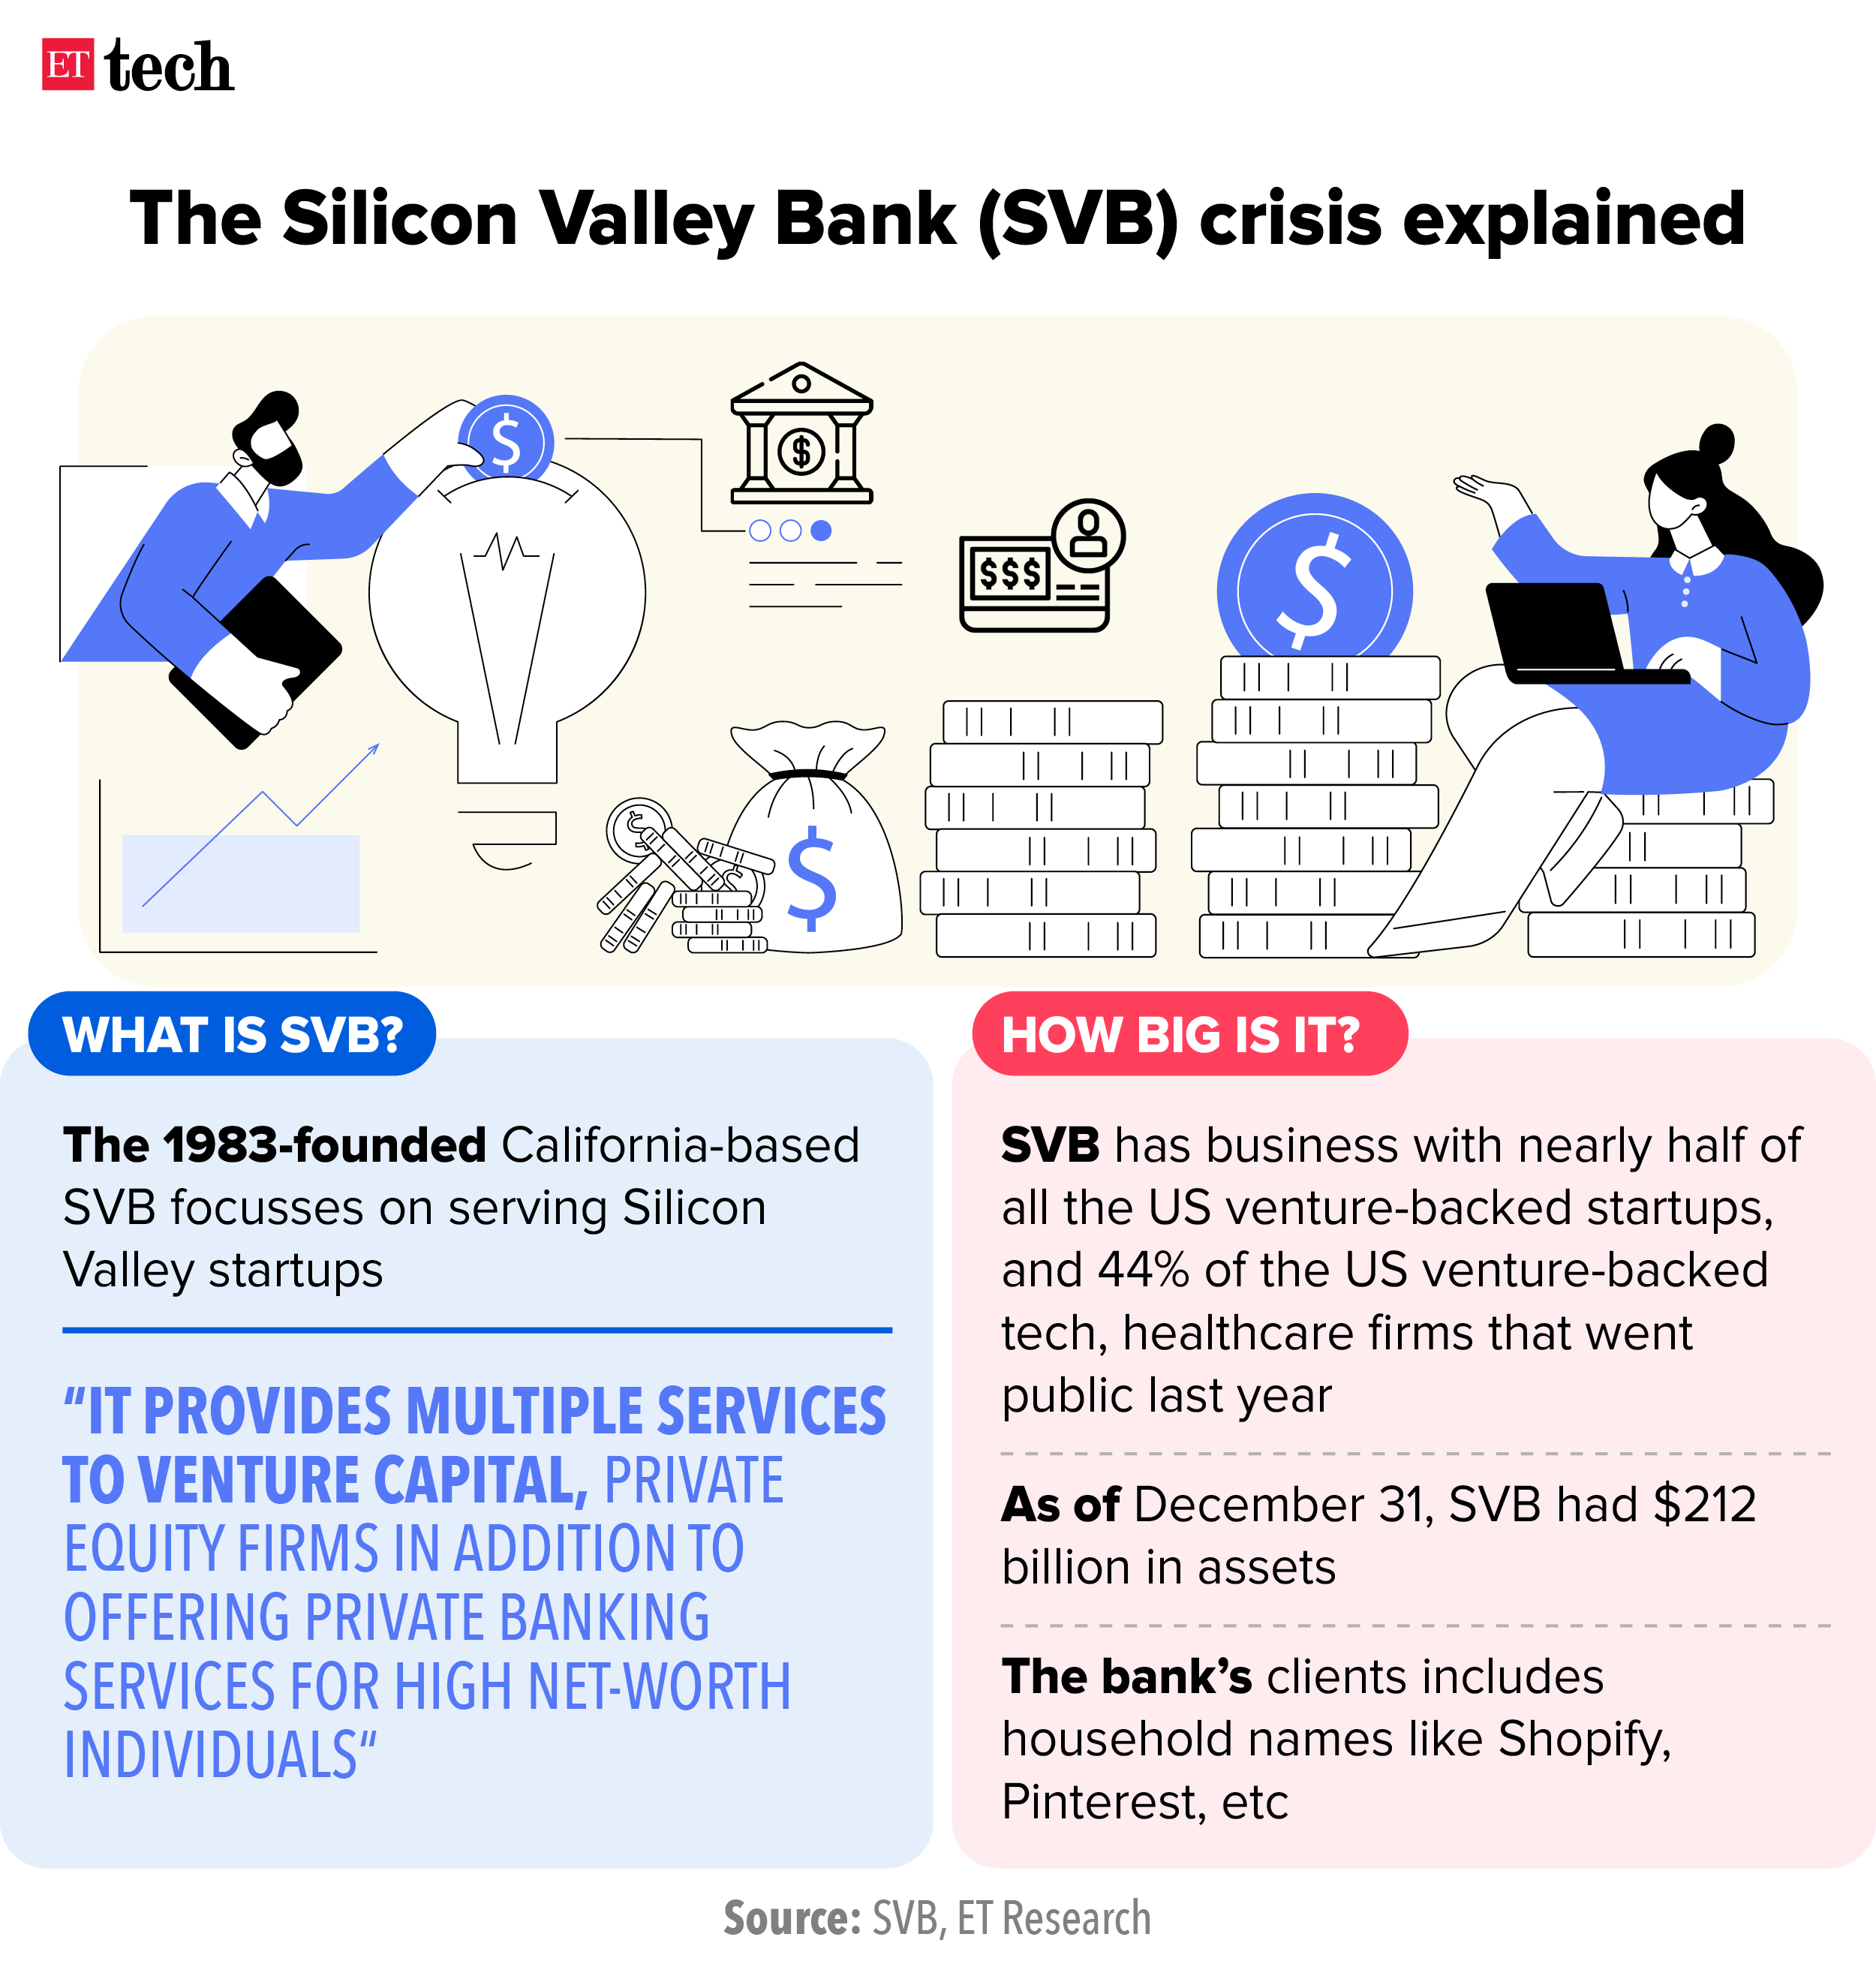 The Silicon Valley Bank crisis explained